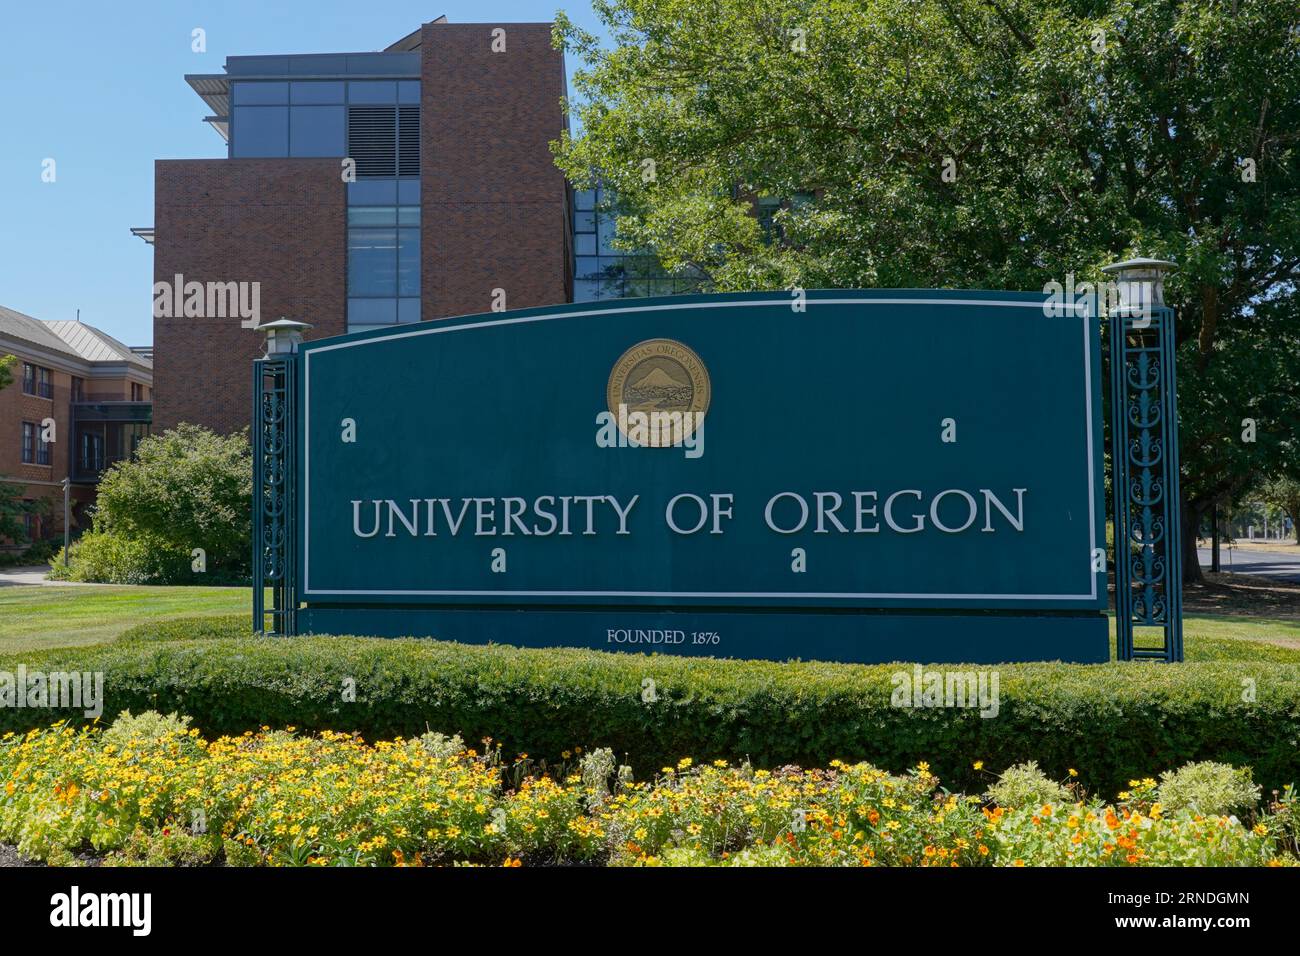 University of Oregon campus sign. The University of Oregon is a public research university in Eugene, Oregon. founded in 1876. Stock Photo